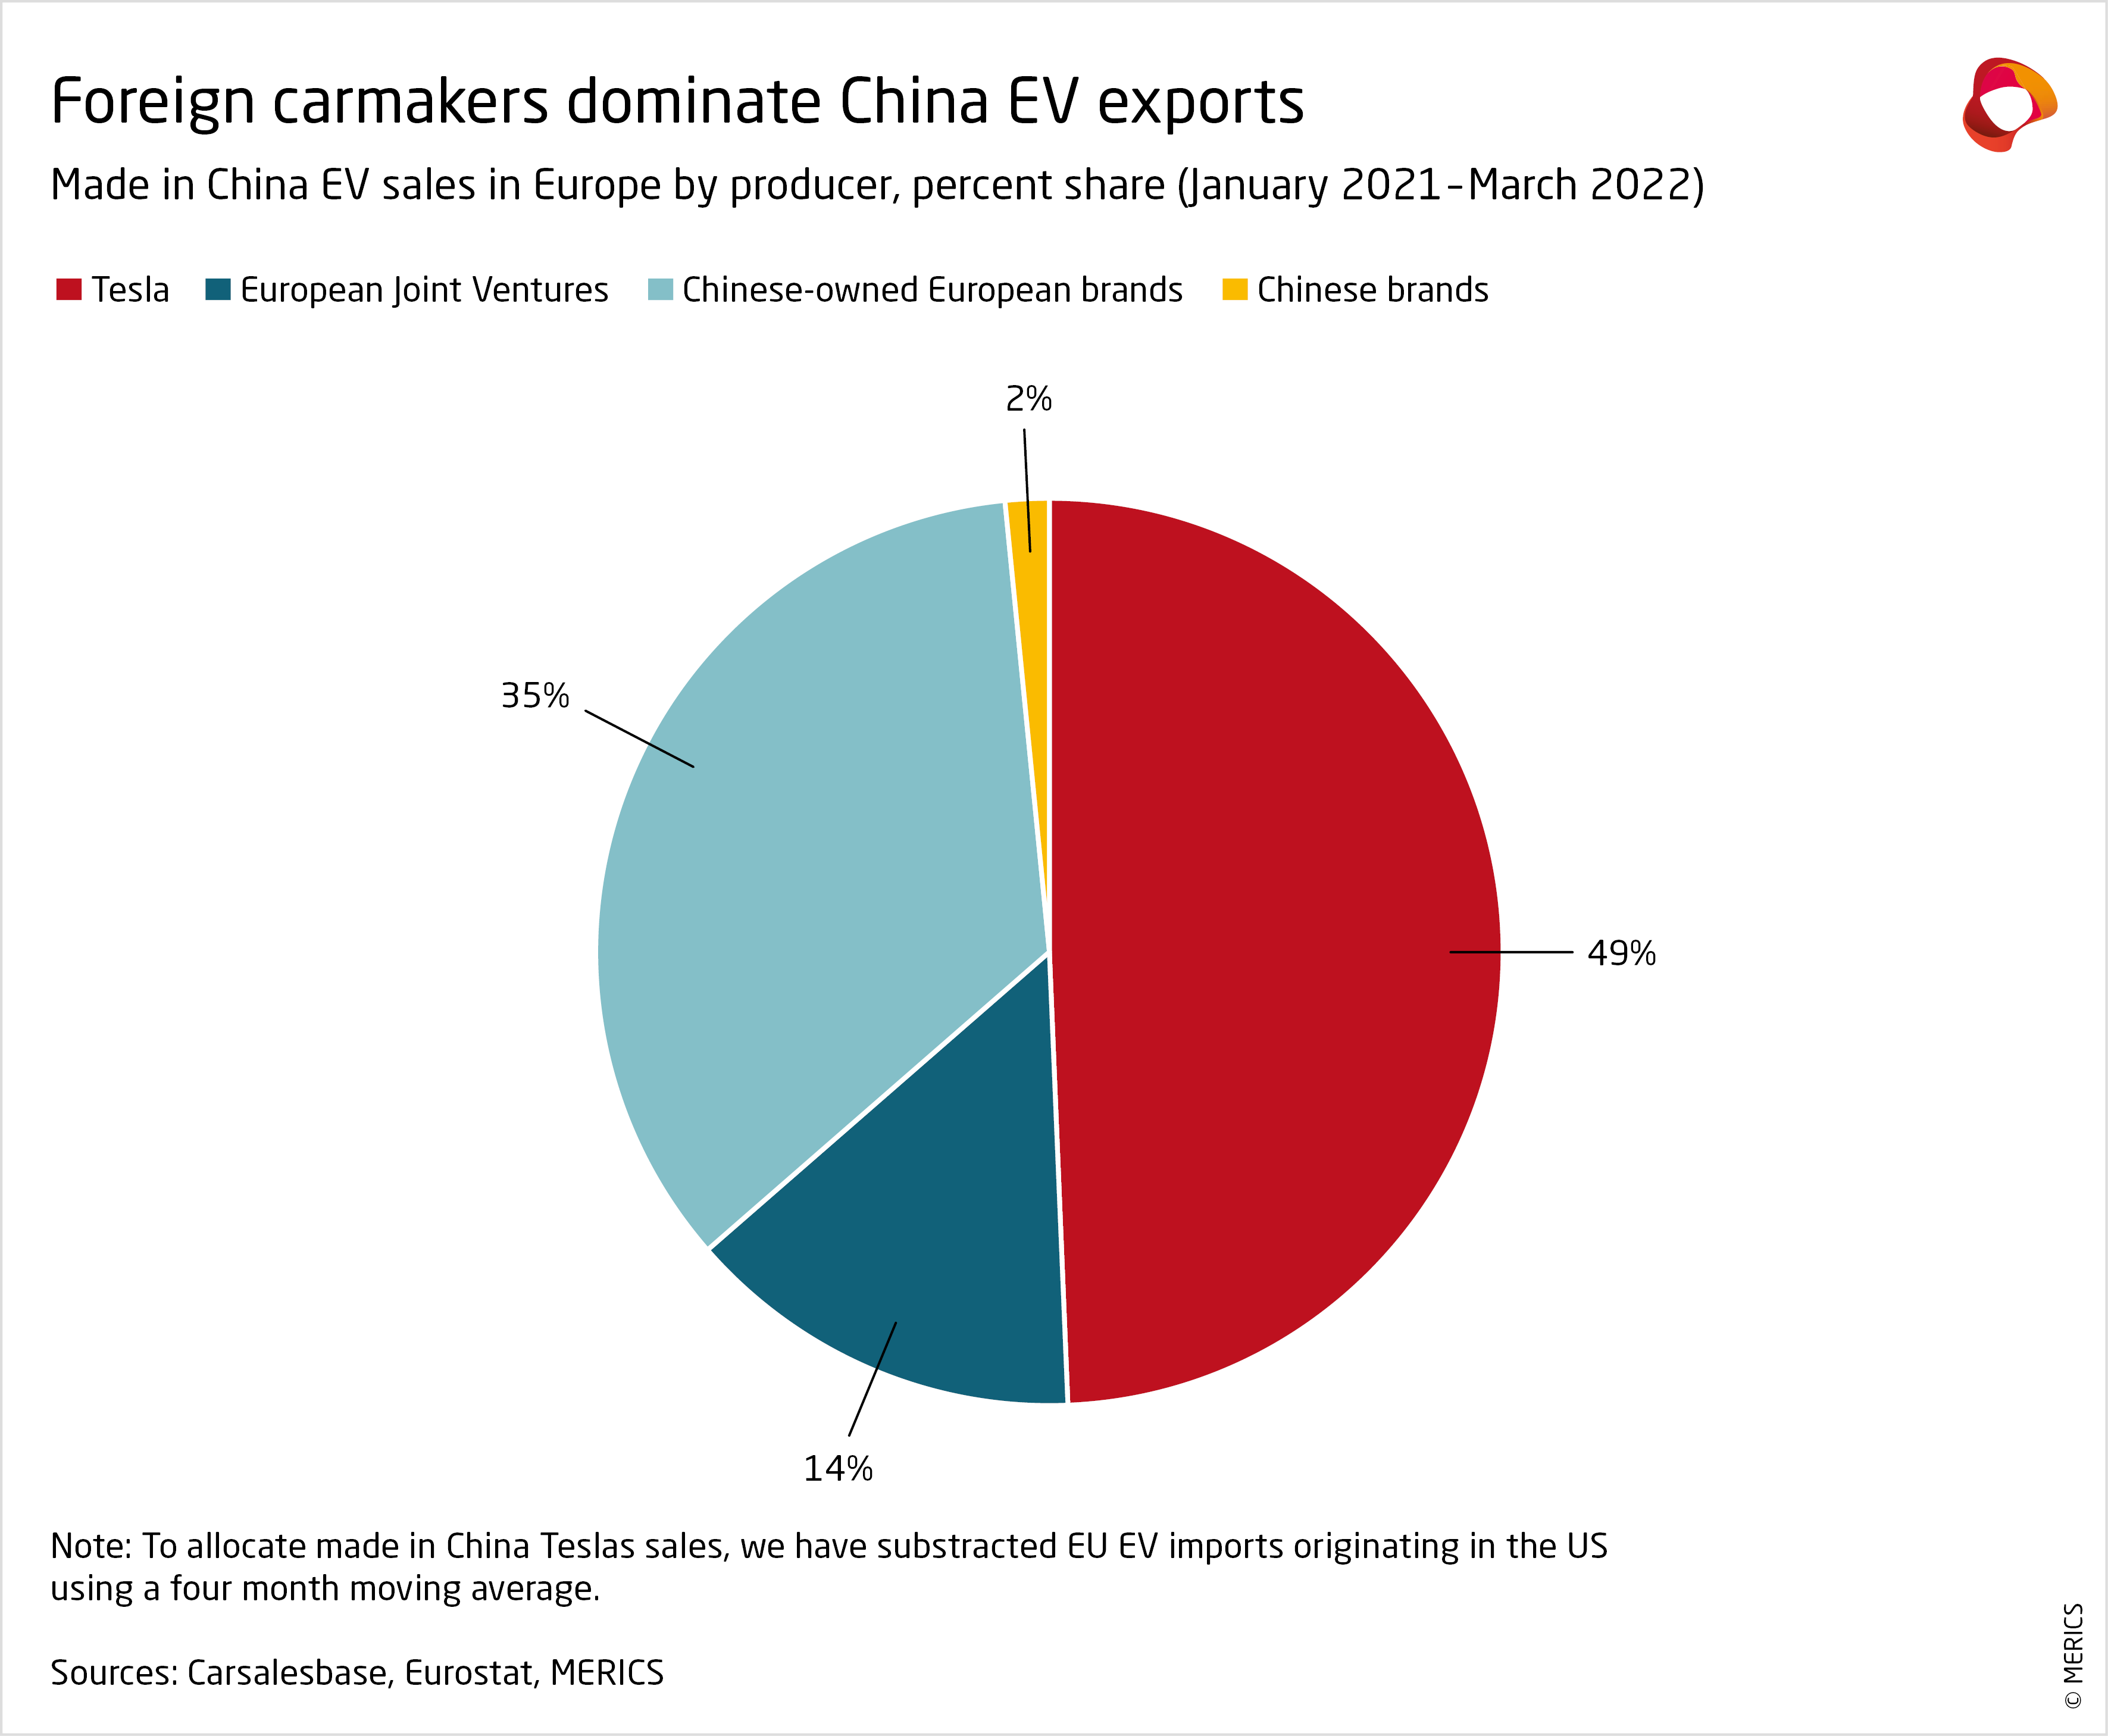 "Made in China" electric vehicles could turn SinoEU trade on its head